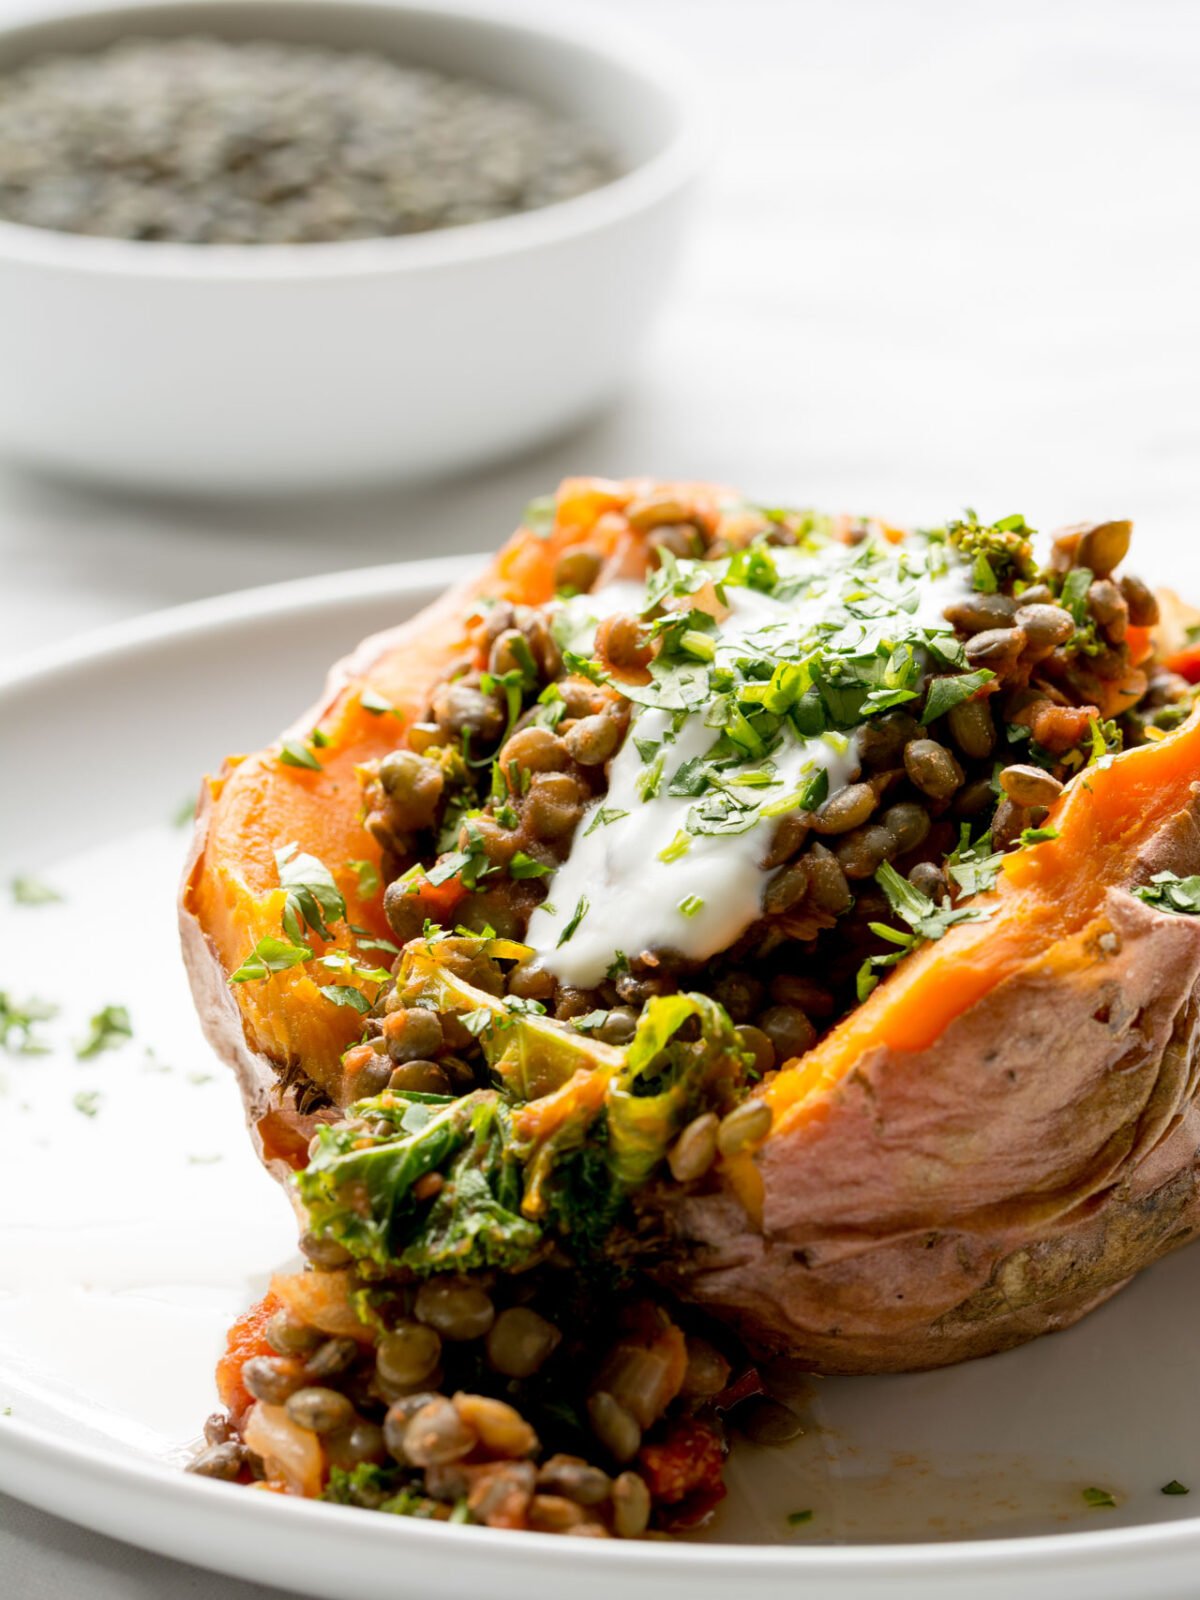 Sweet Potato stuffed with lentils, kale and sun dried tomatoes on a white plate with more lentils in a bowl in the background.